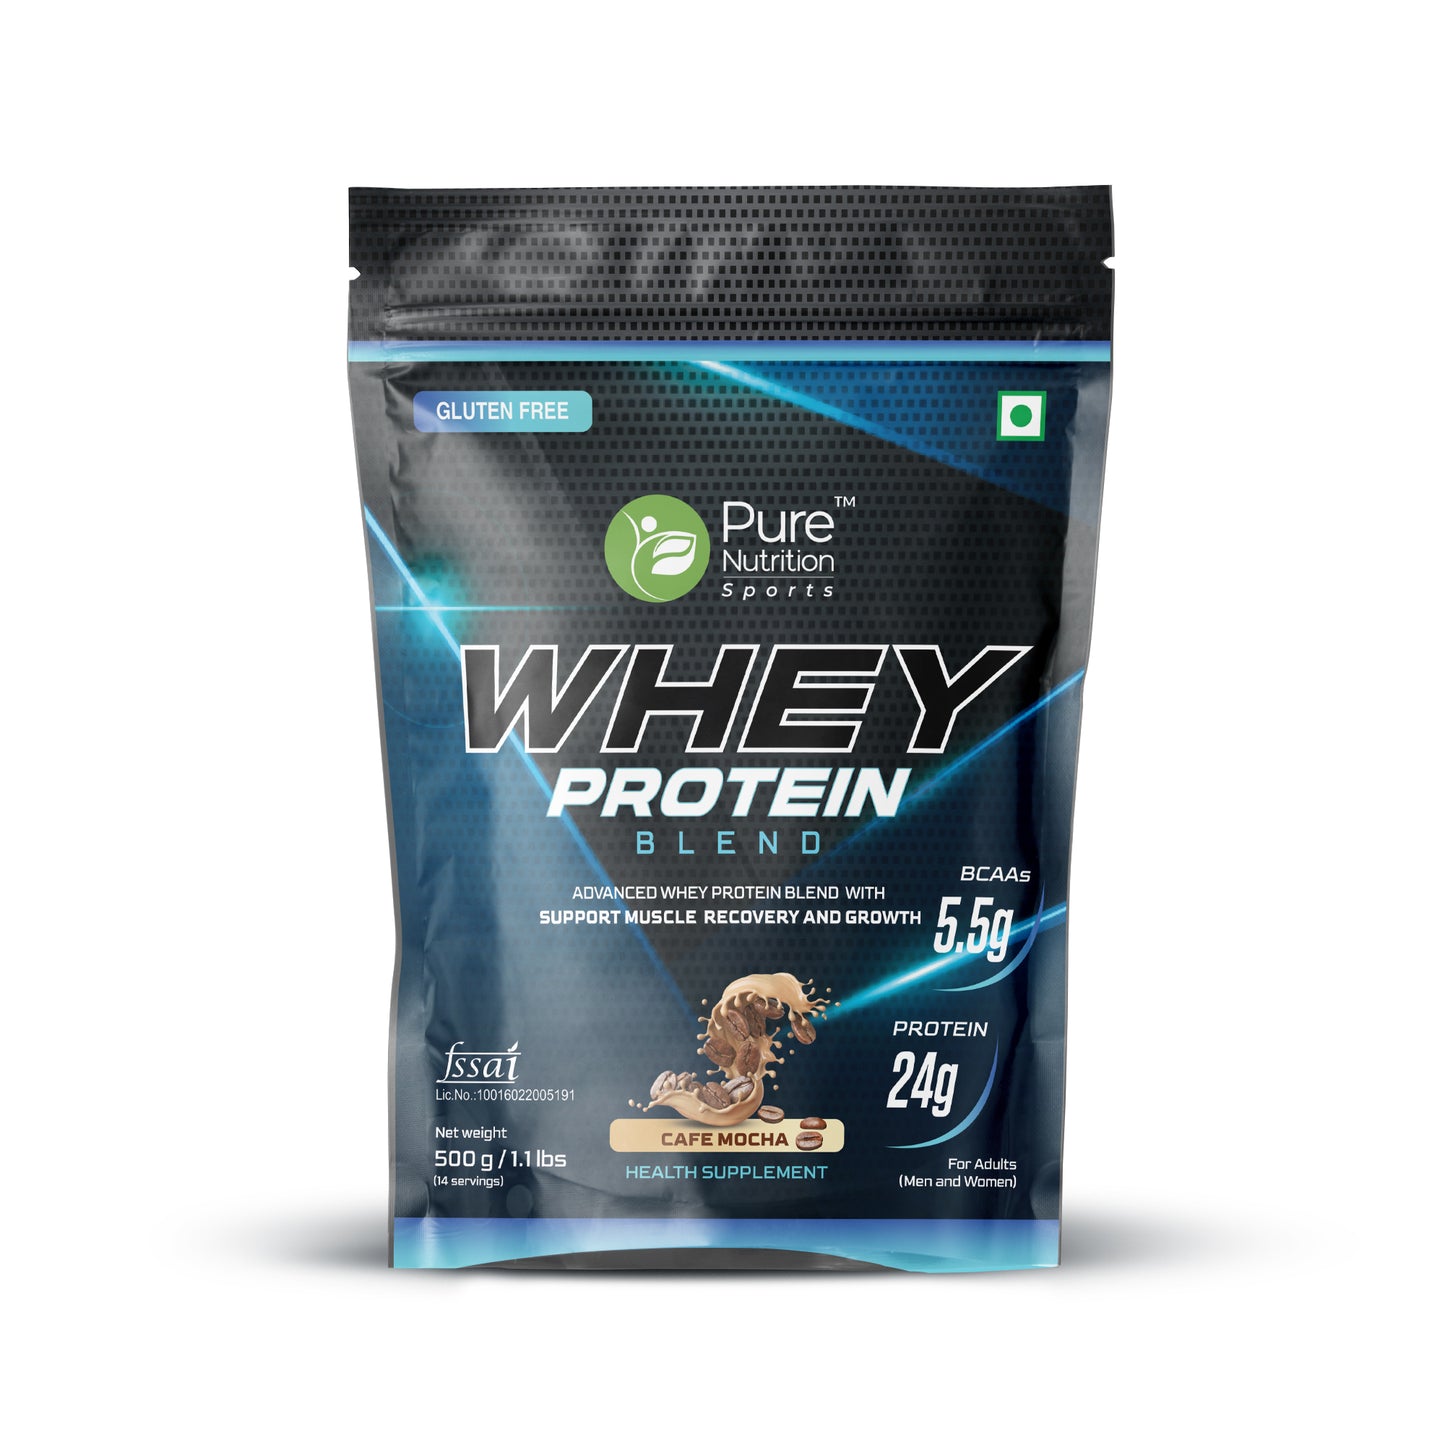 Whey Protein Blend - Chocolate Flavour - 500 gm